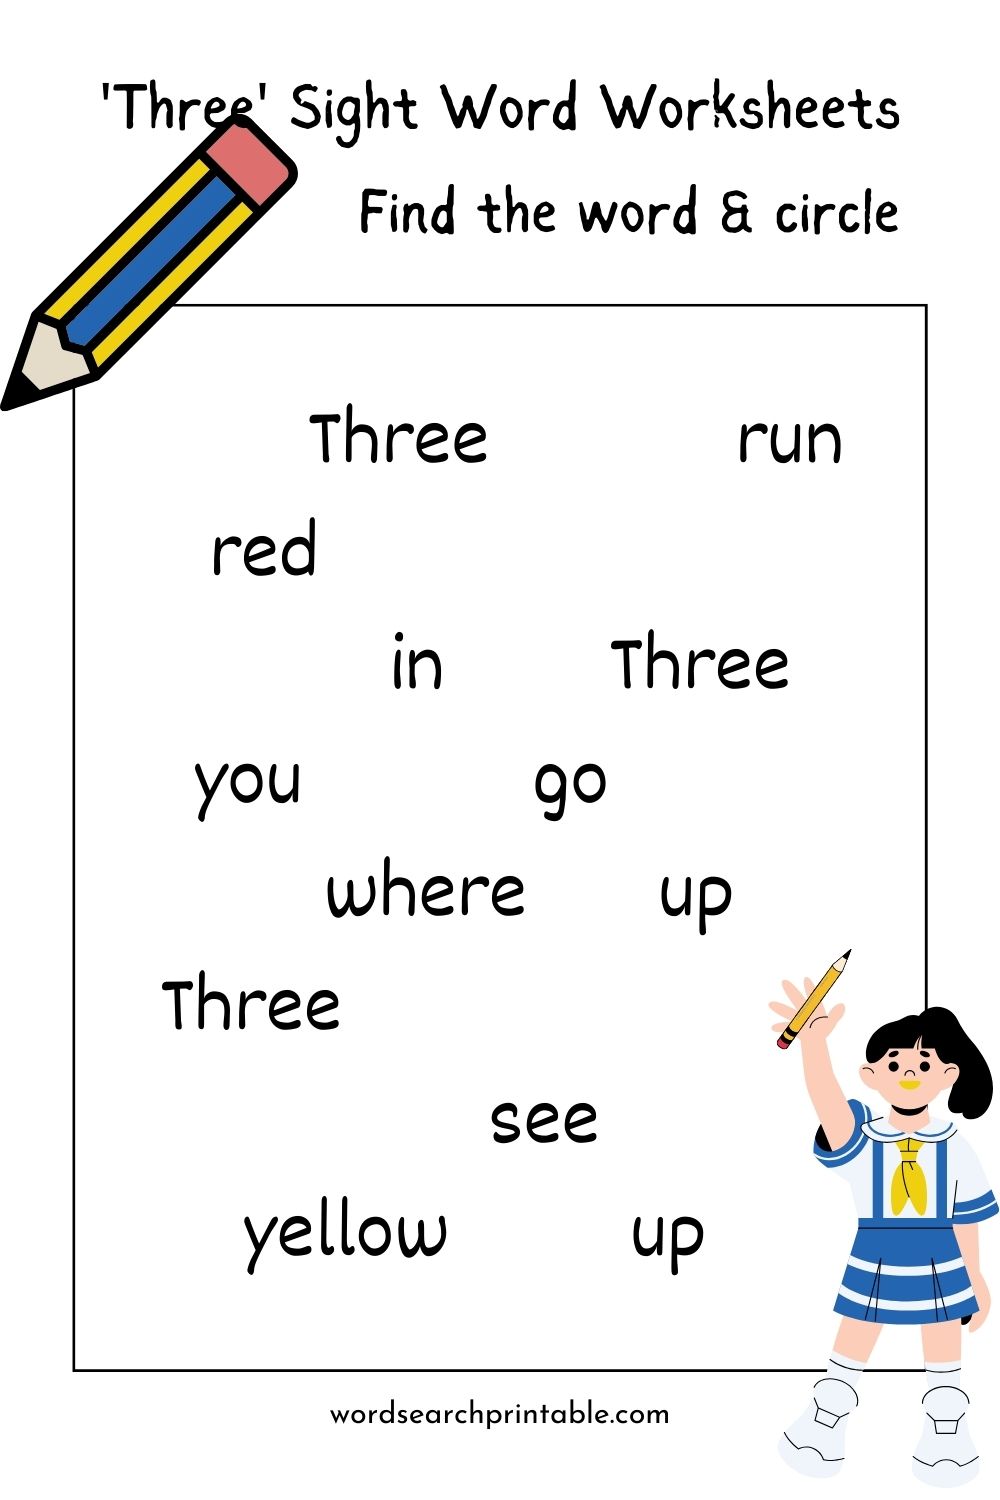 Find the sight word Three and circle it - Sight word Three word hunt